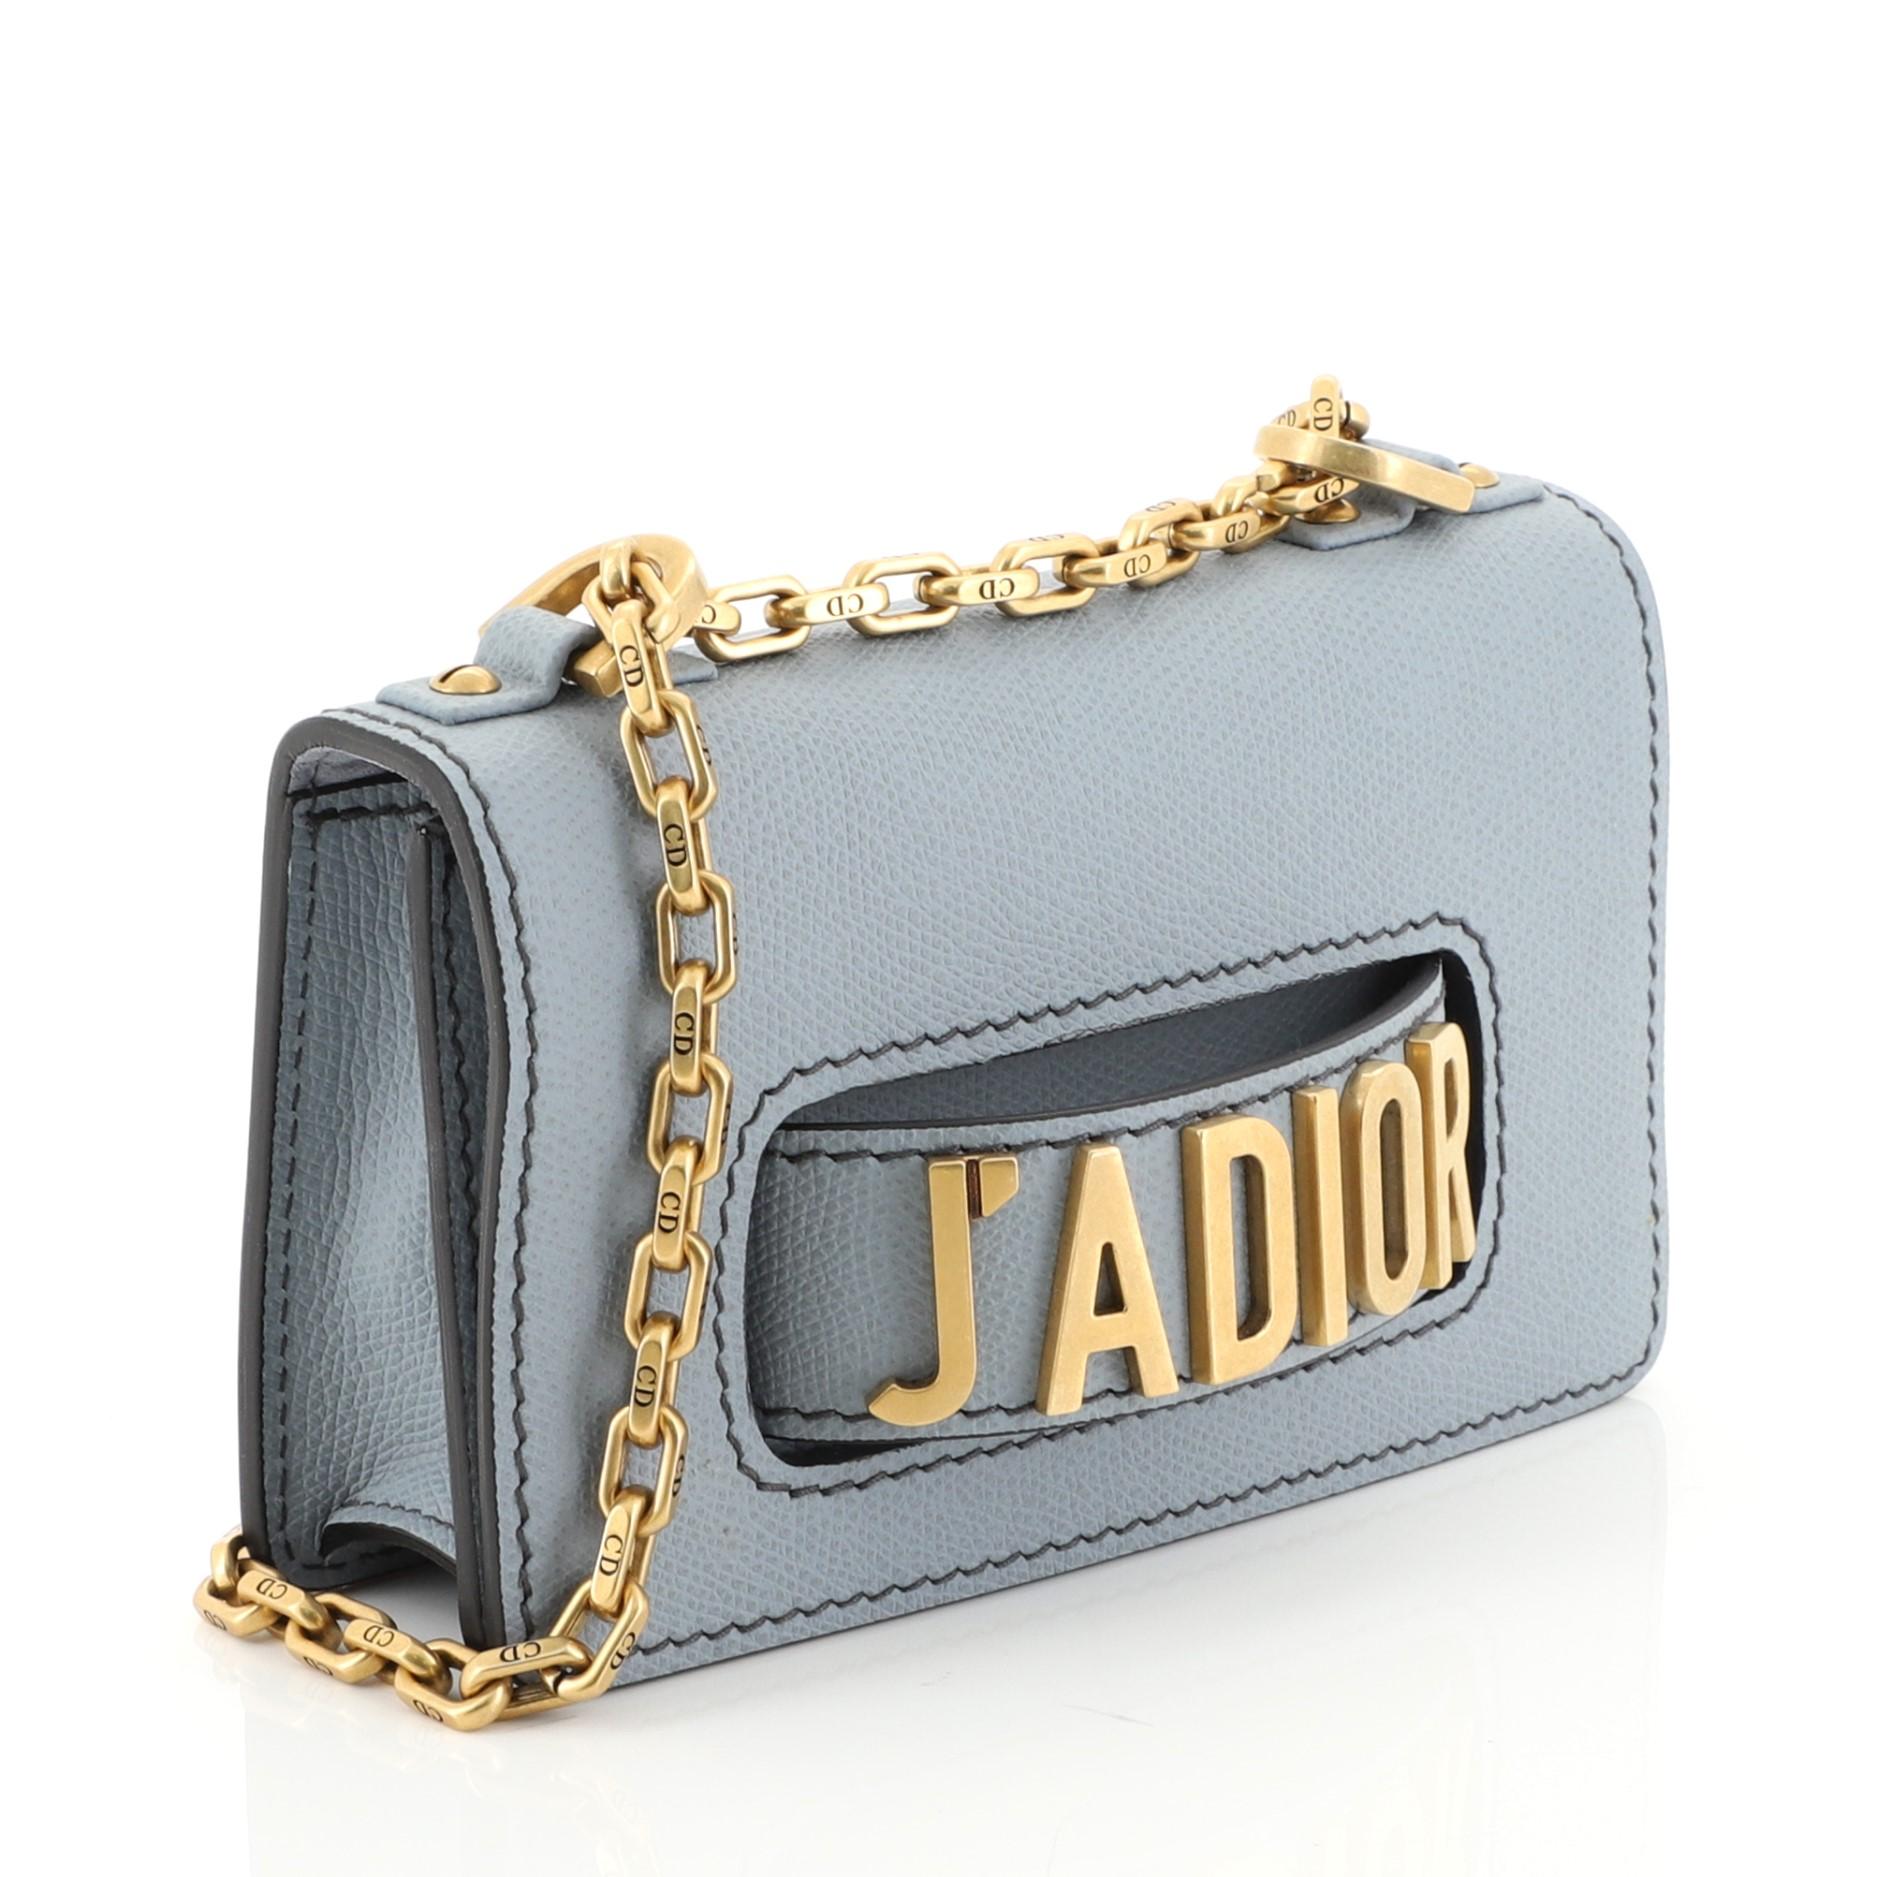 This Christian Dior J'adior Flap Bag Leather Mini, crafted from blue leather, features chain link strap, slot handclasp, and aged gold-tone hardware. Its flap opens to a blue suede interior with slip pocket. 

Estimated Retail Price: